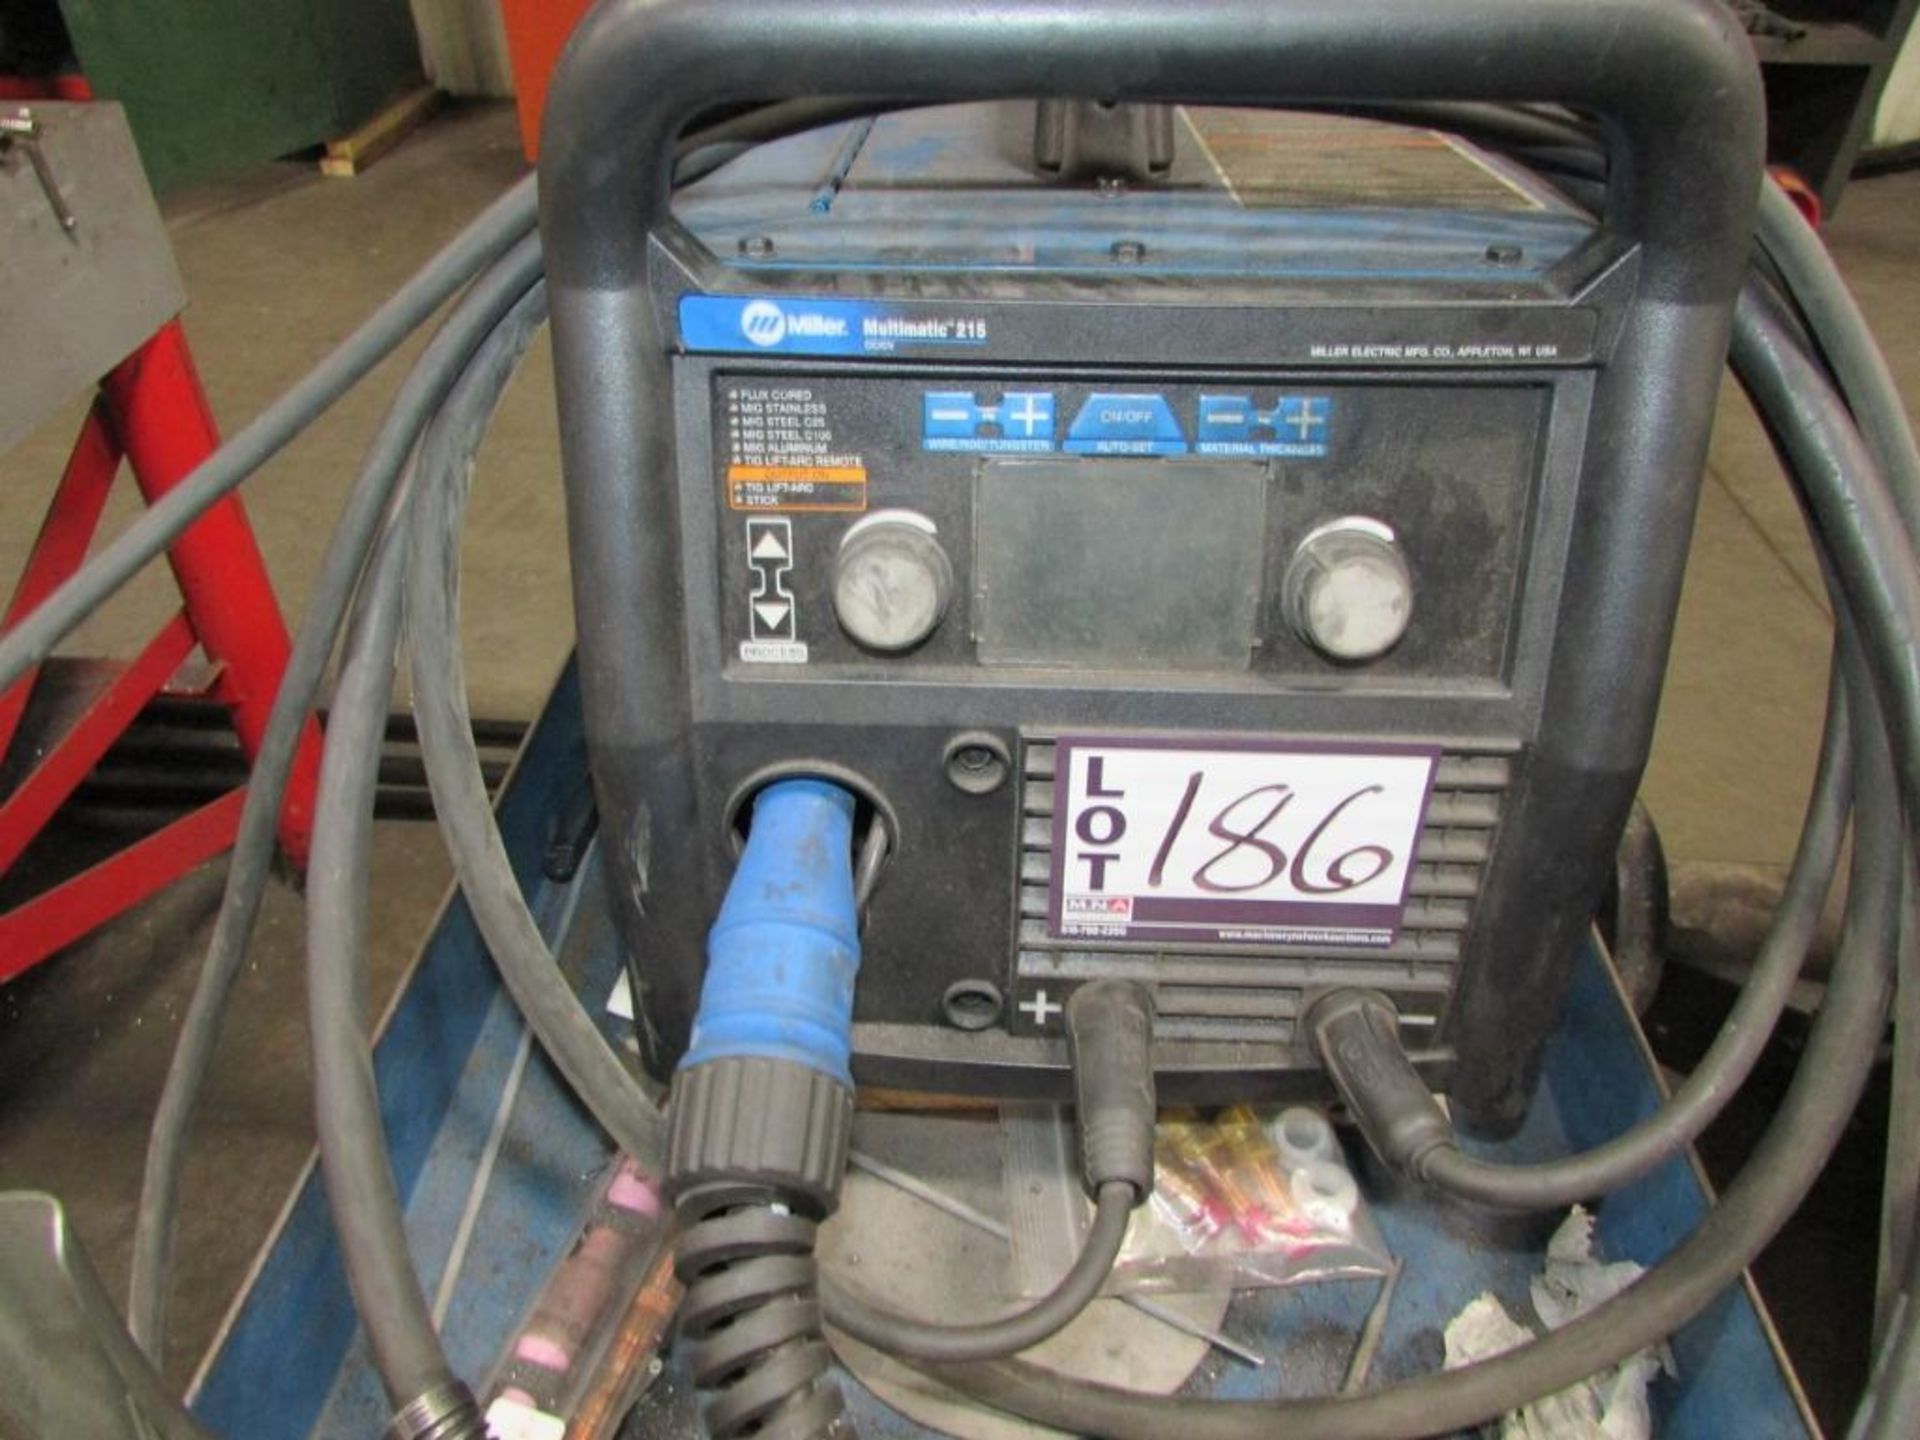 Miller Multimatic 215 CC/CV Multi Process Welding Power Source, with Internal Wire Feeder, Welding C - Image 3 of 8